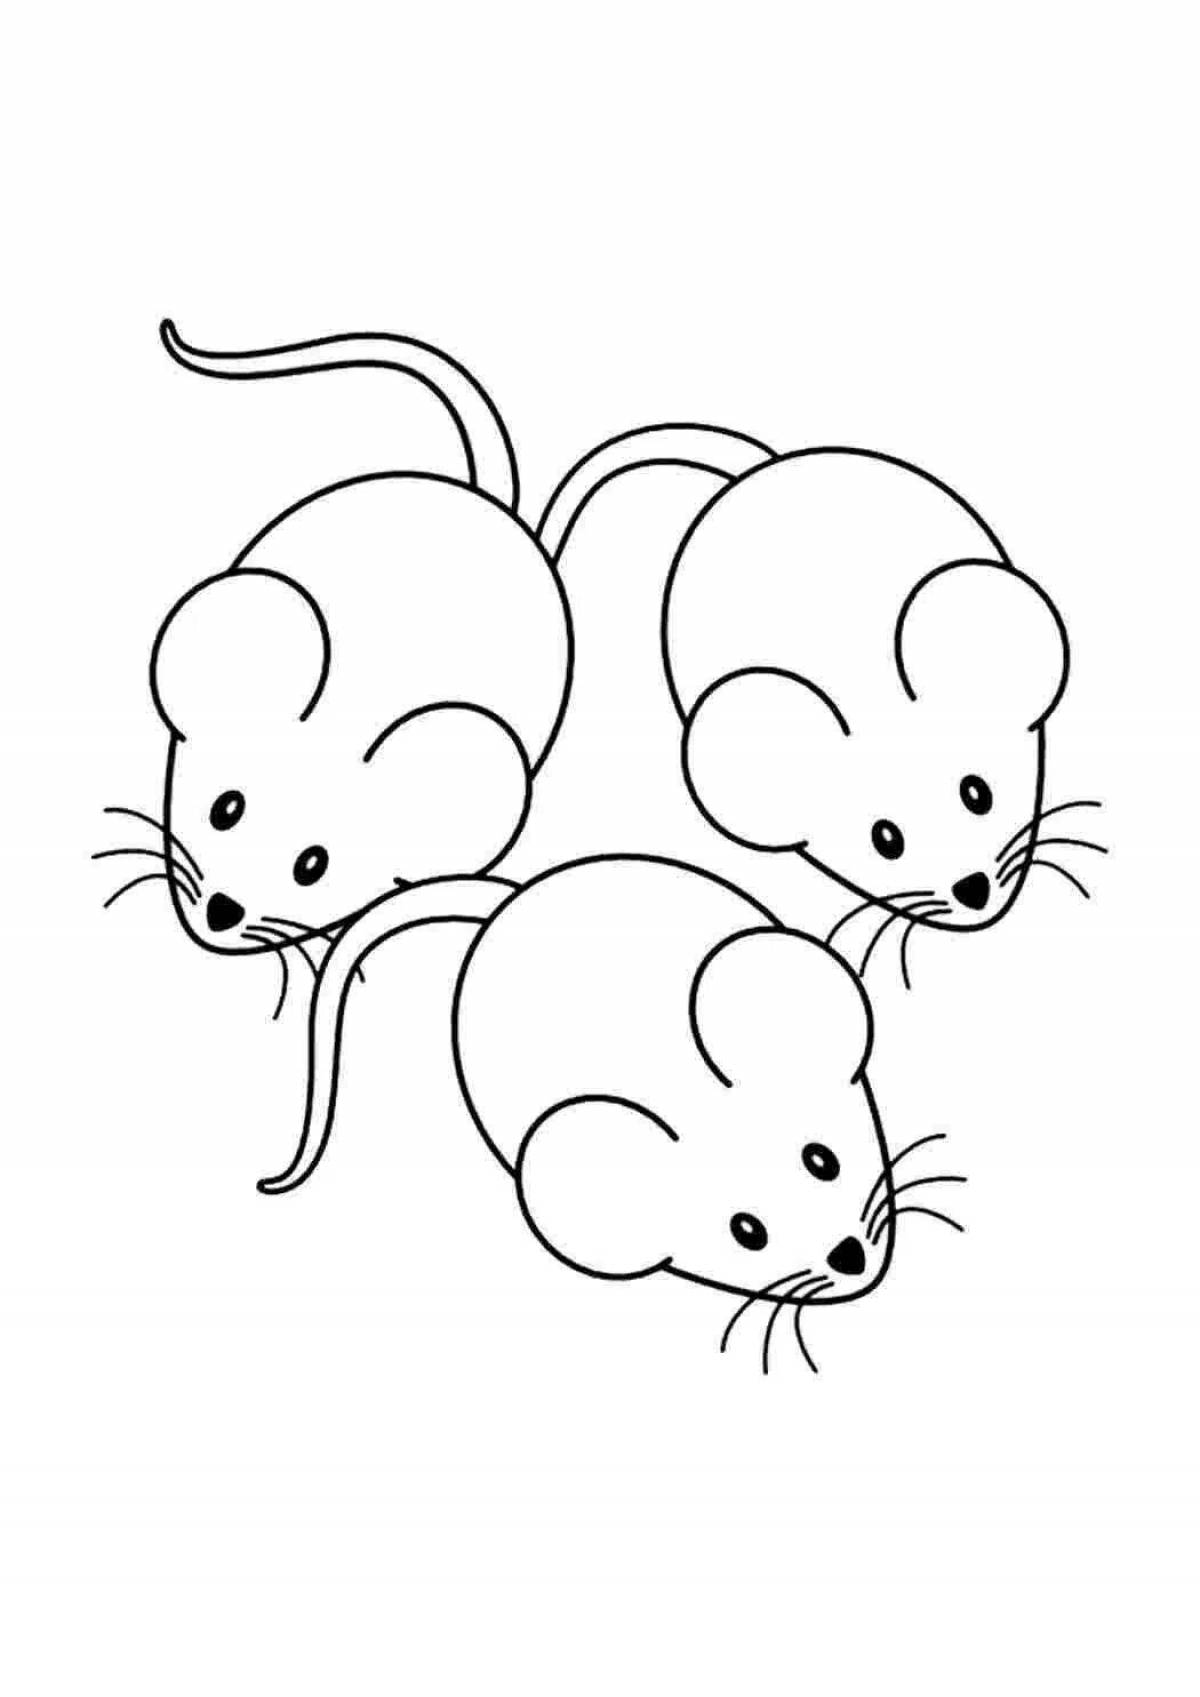 Amazing mouse coloring book for 4-5 year olds